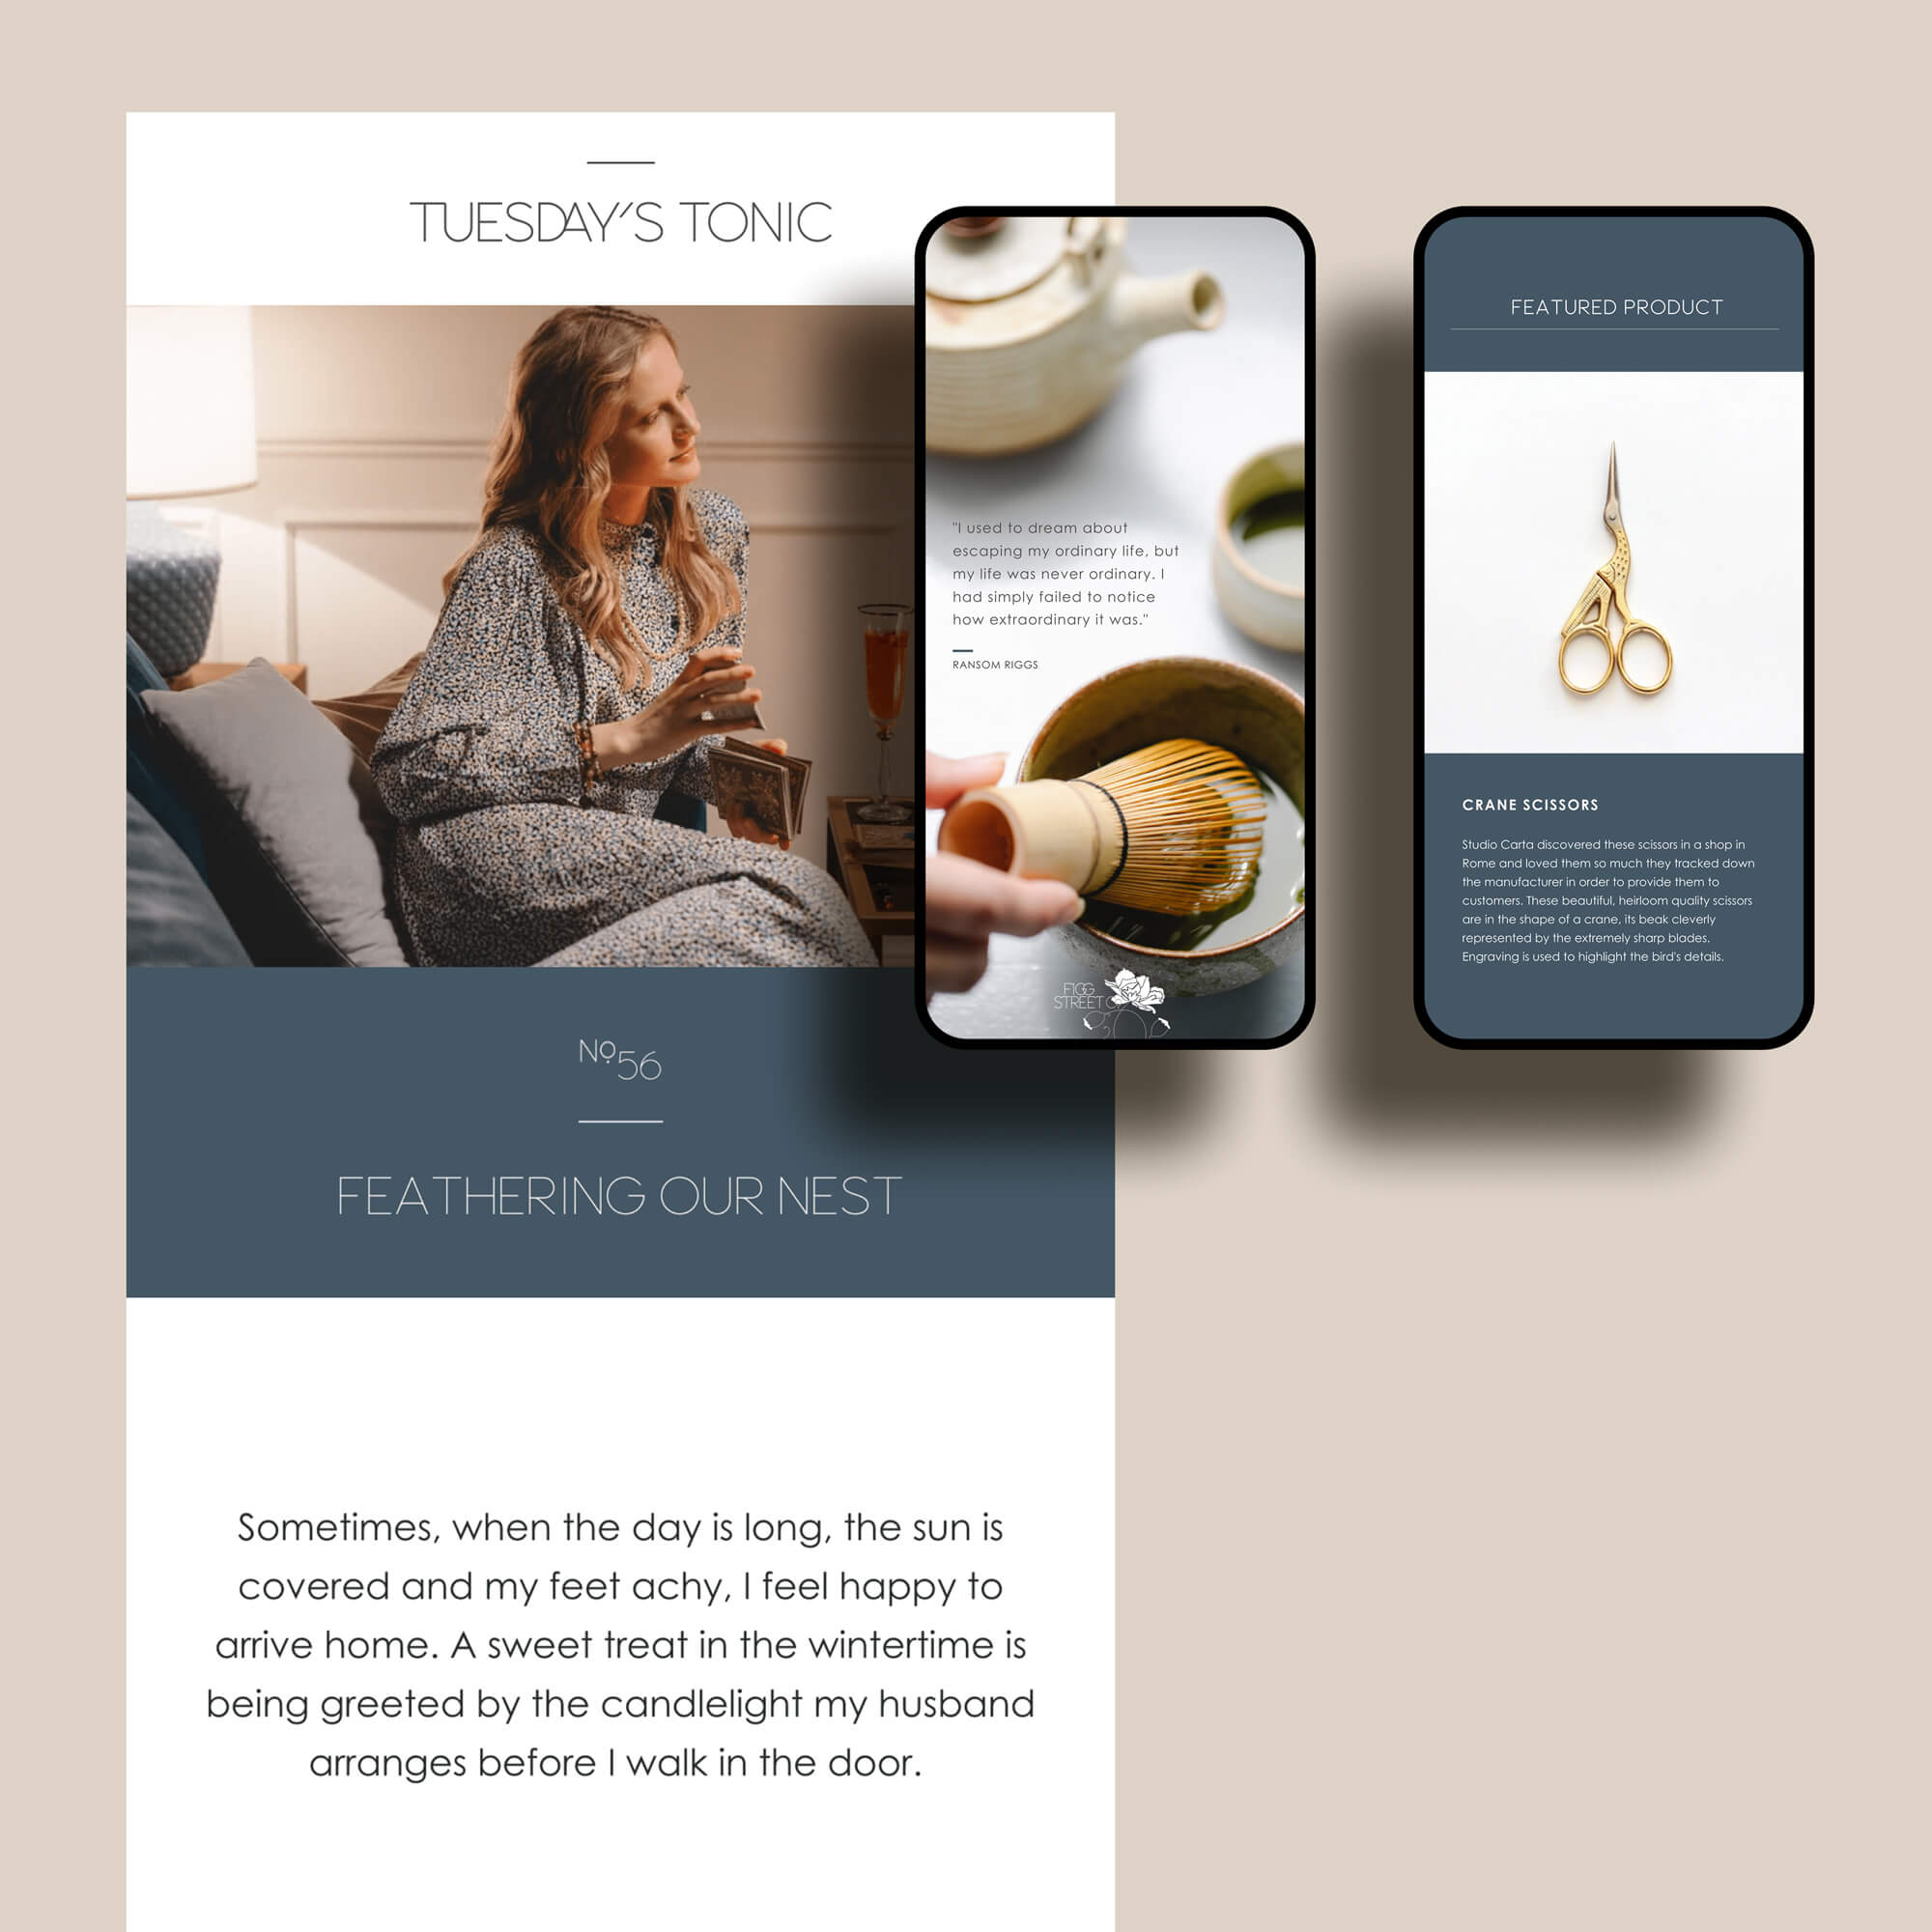 Shopify ecommerce website design and digital marketing for Figg Street Co. by Tulip Tree Creative